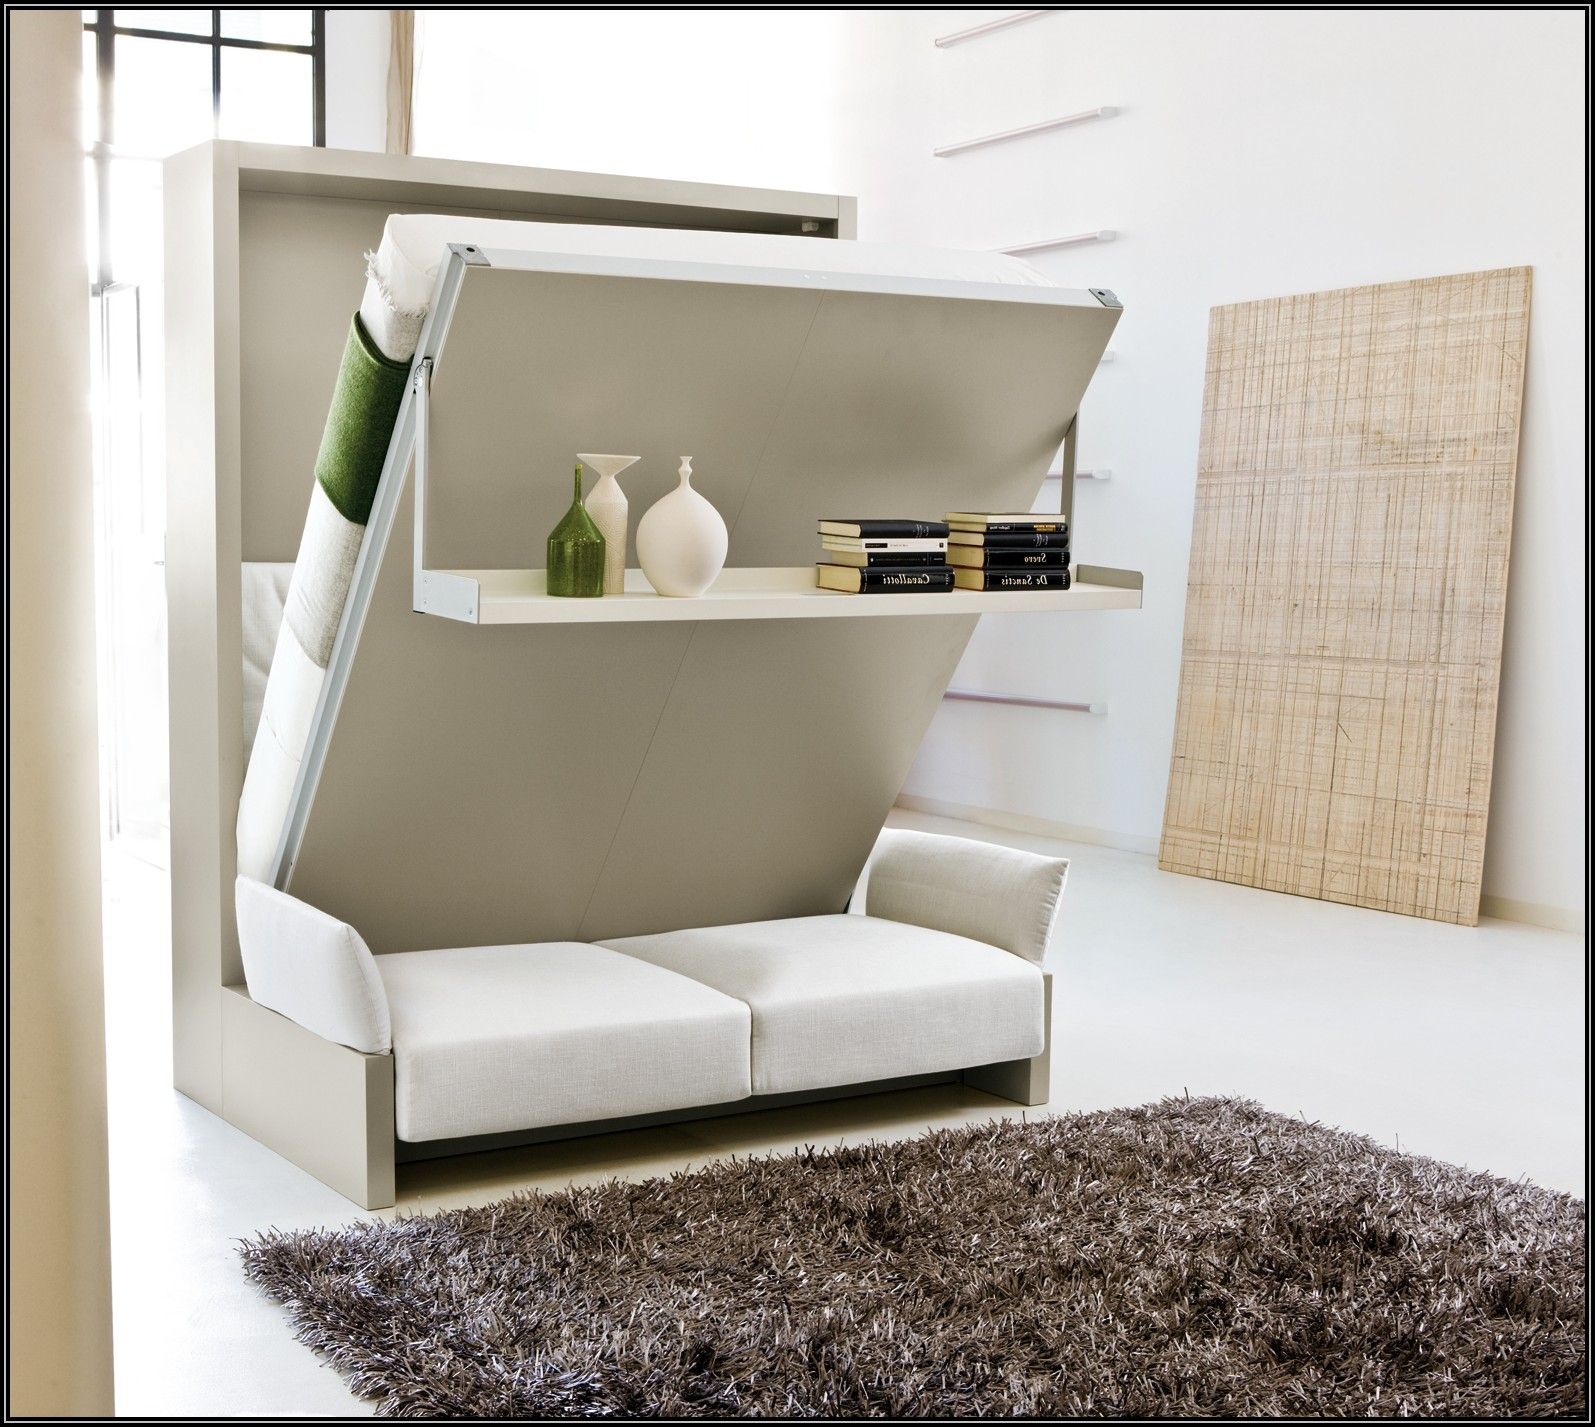 sofa bed by VorobCraft Cabinetry